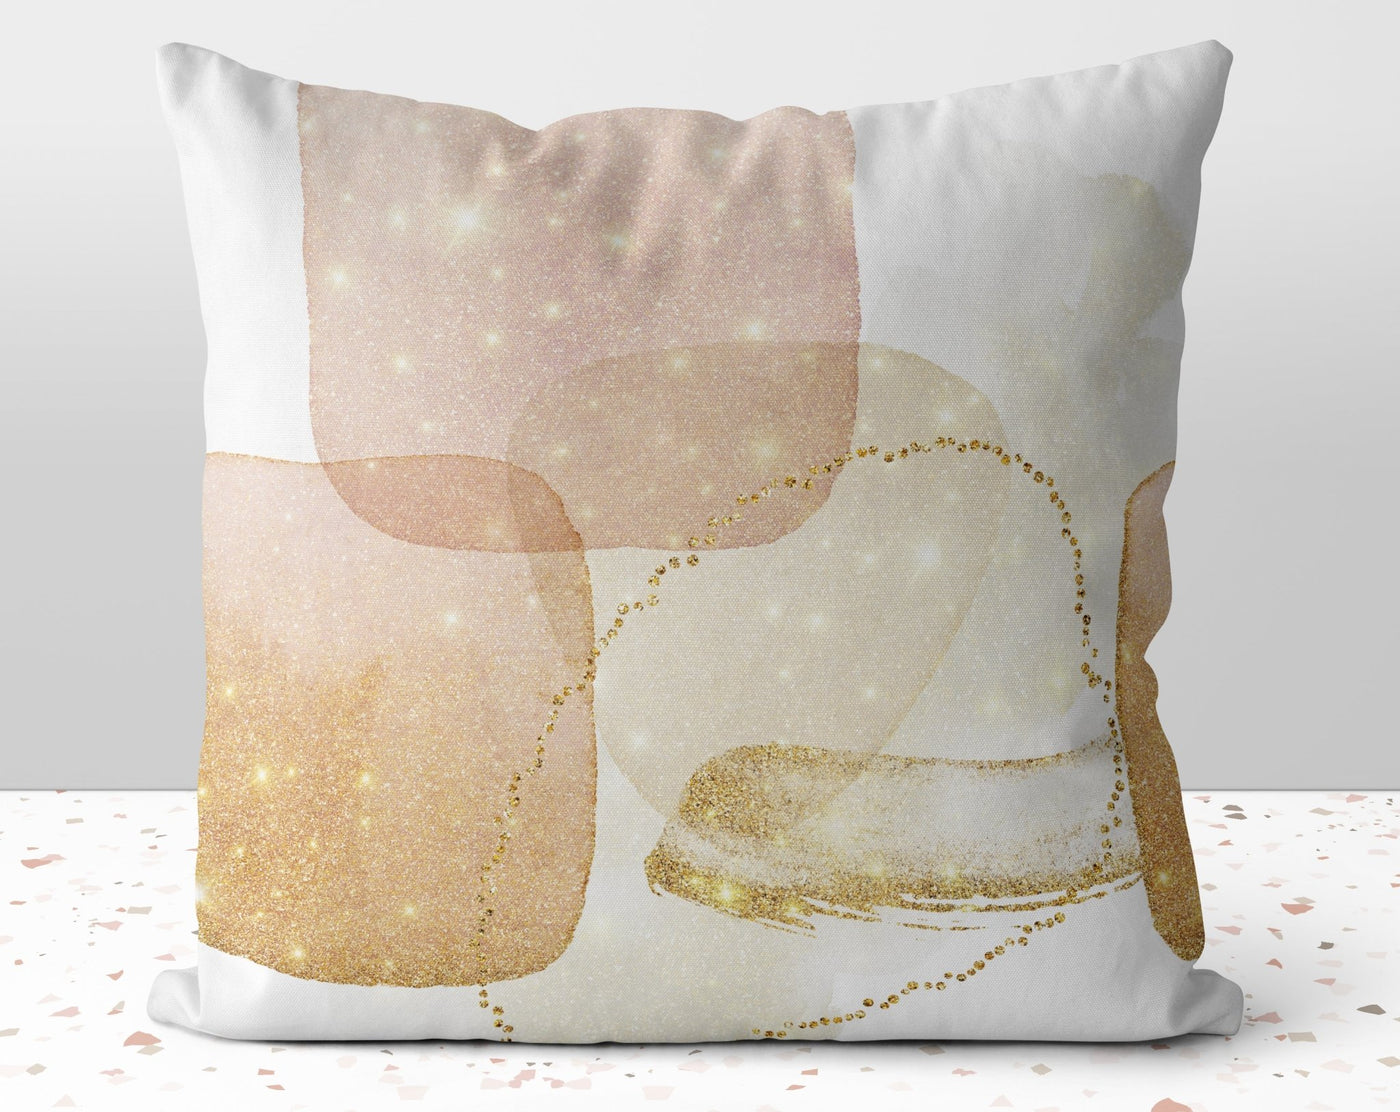 Celestial Glam Peach Pink with Gold Printed Accents Pillow Throw Cover with Insert - Cush Potato Pillows